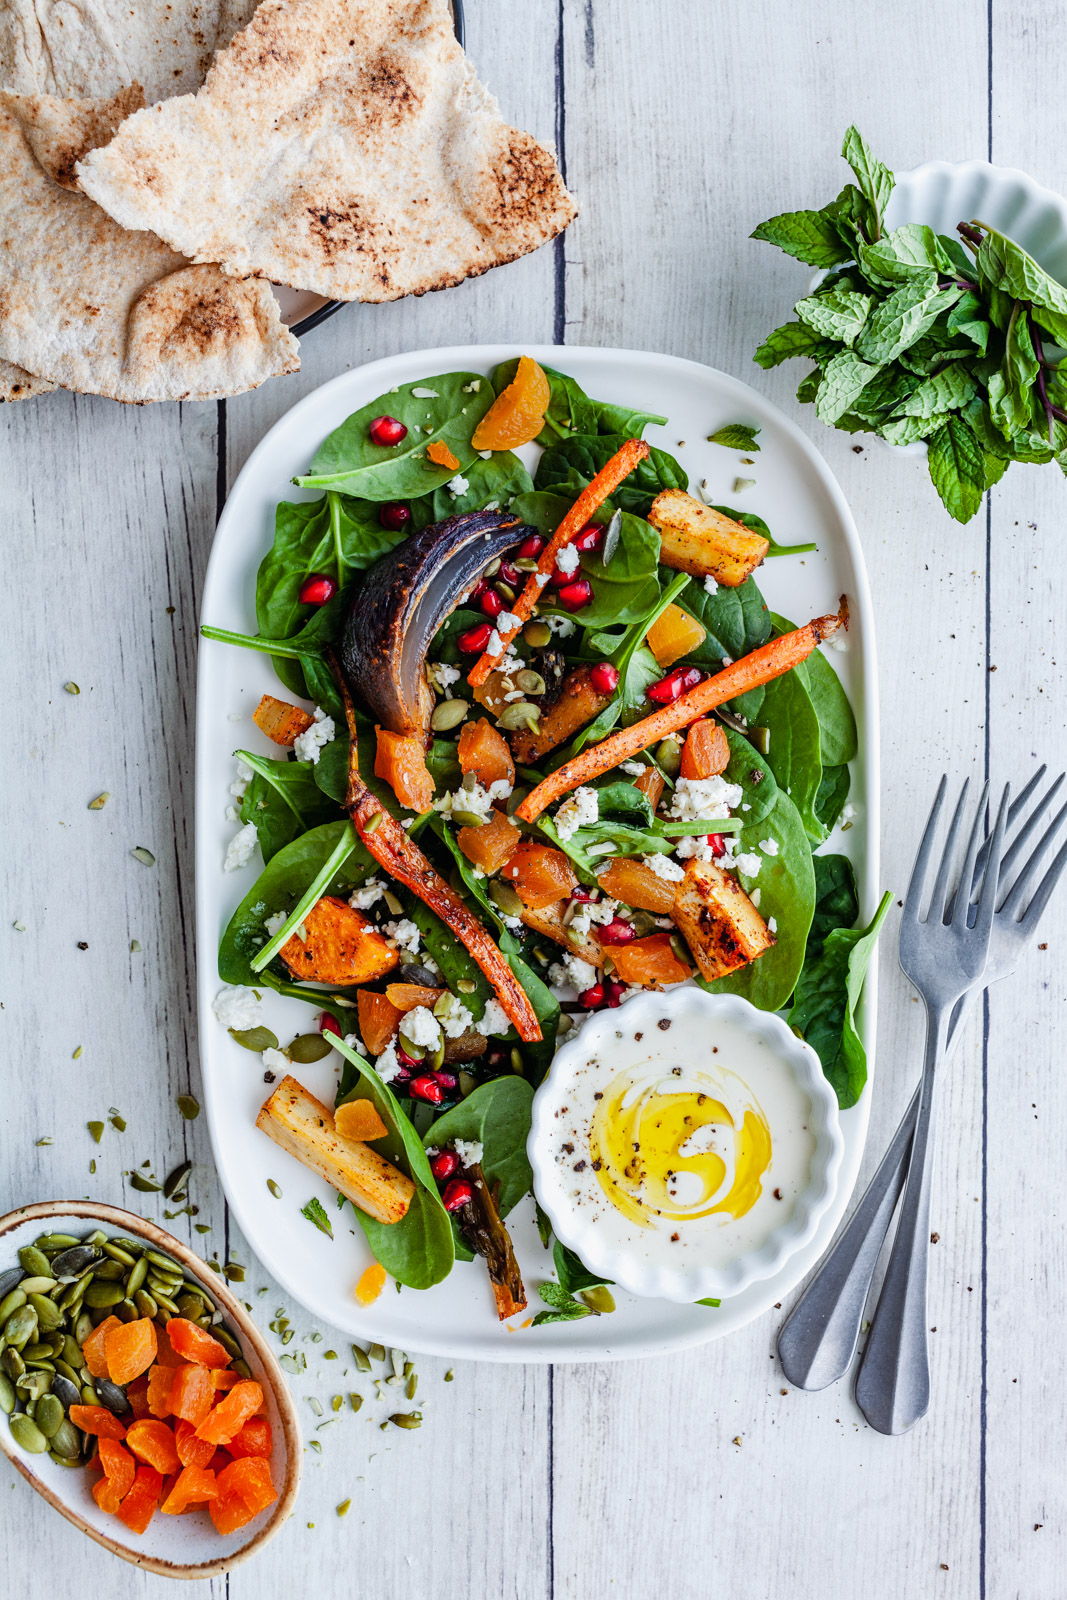 Moroccan Style Roasted Vegetable Salad With a Tahini Dressing